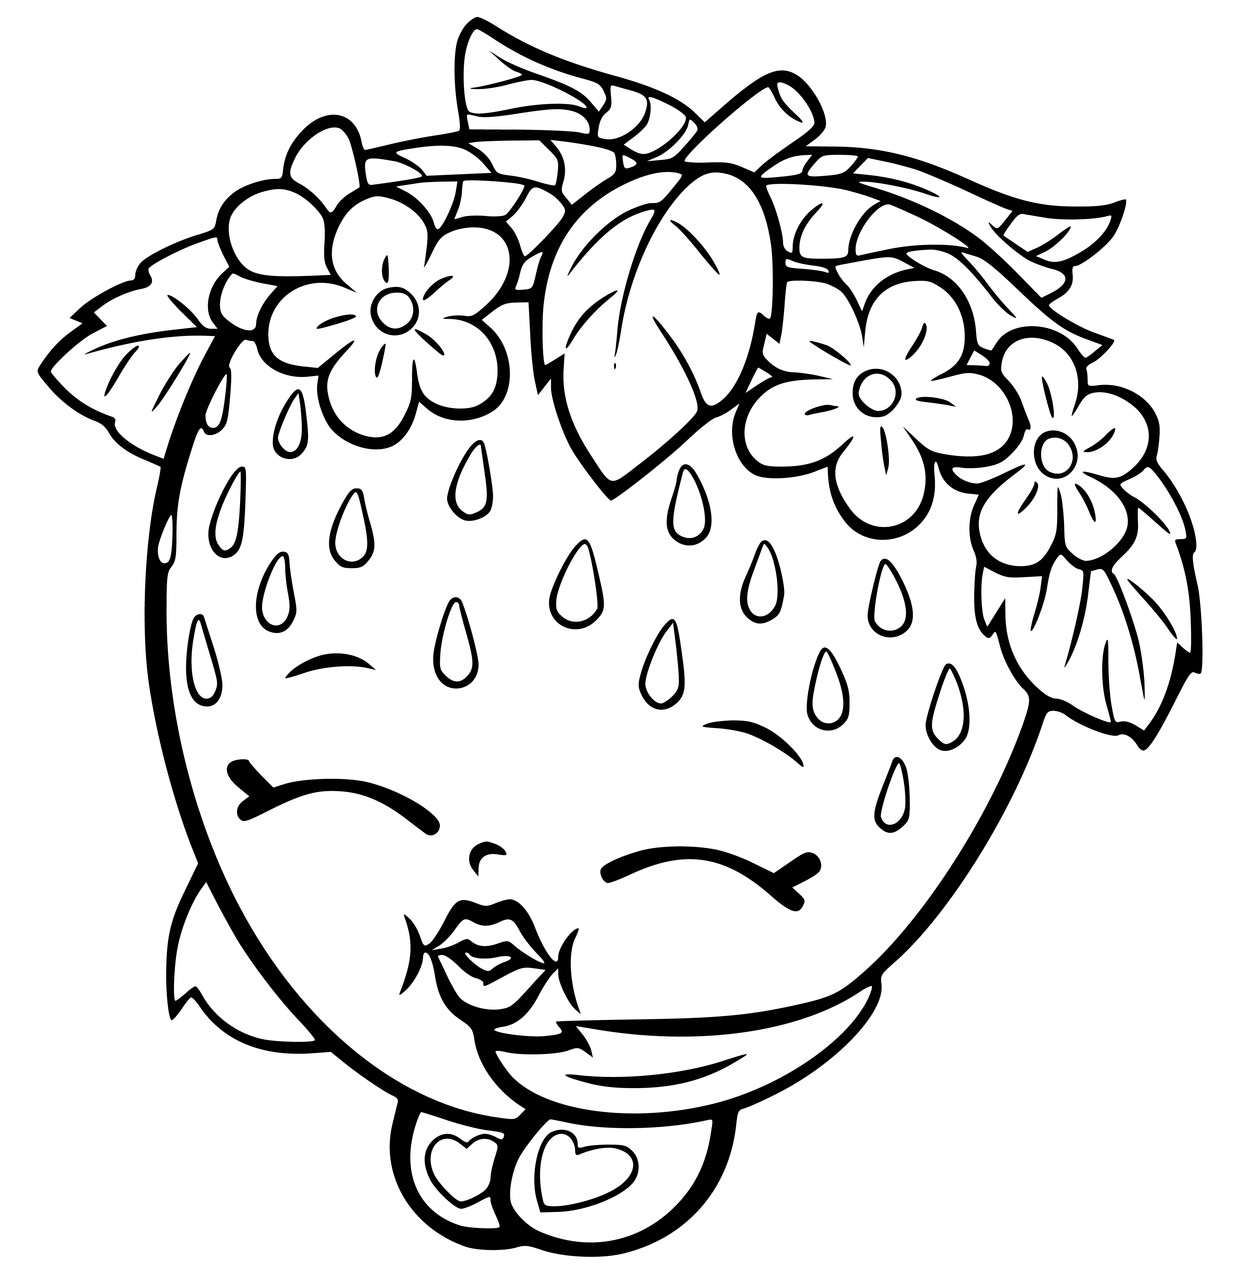 Kids Coloring Page
 Shopkins Coloring Pages Best Coloring Pages For Kids